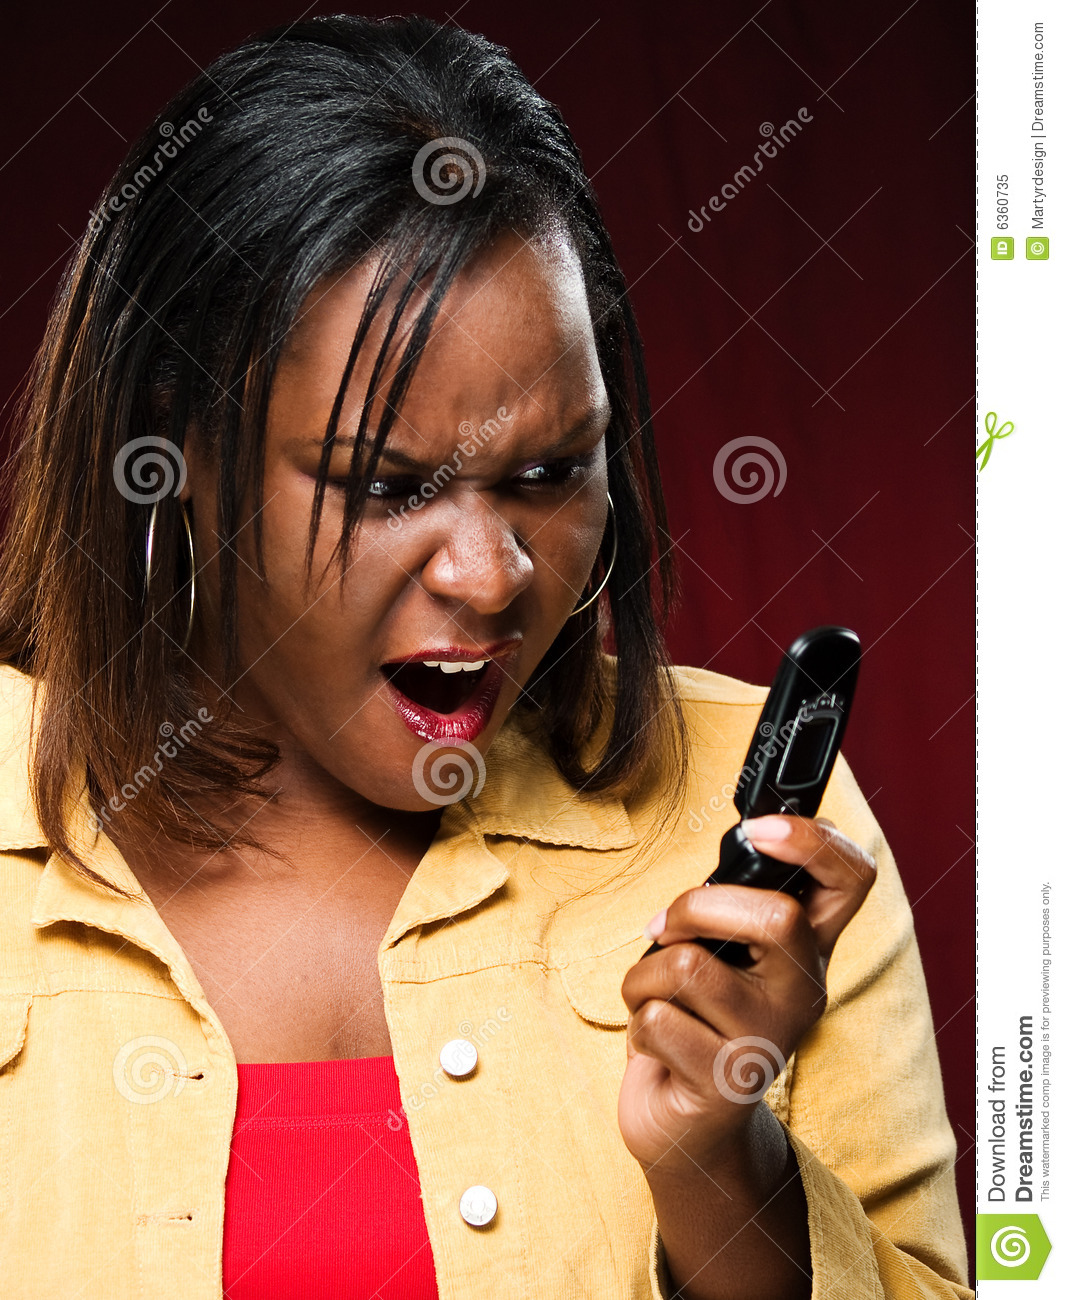 Girl Appalled While Using Cellphone Royalty Free Stock Photo   Image